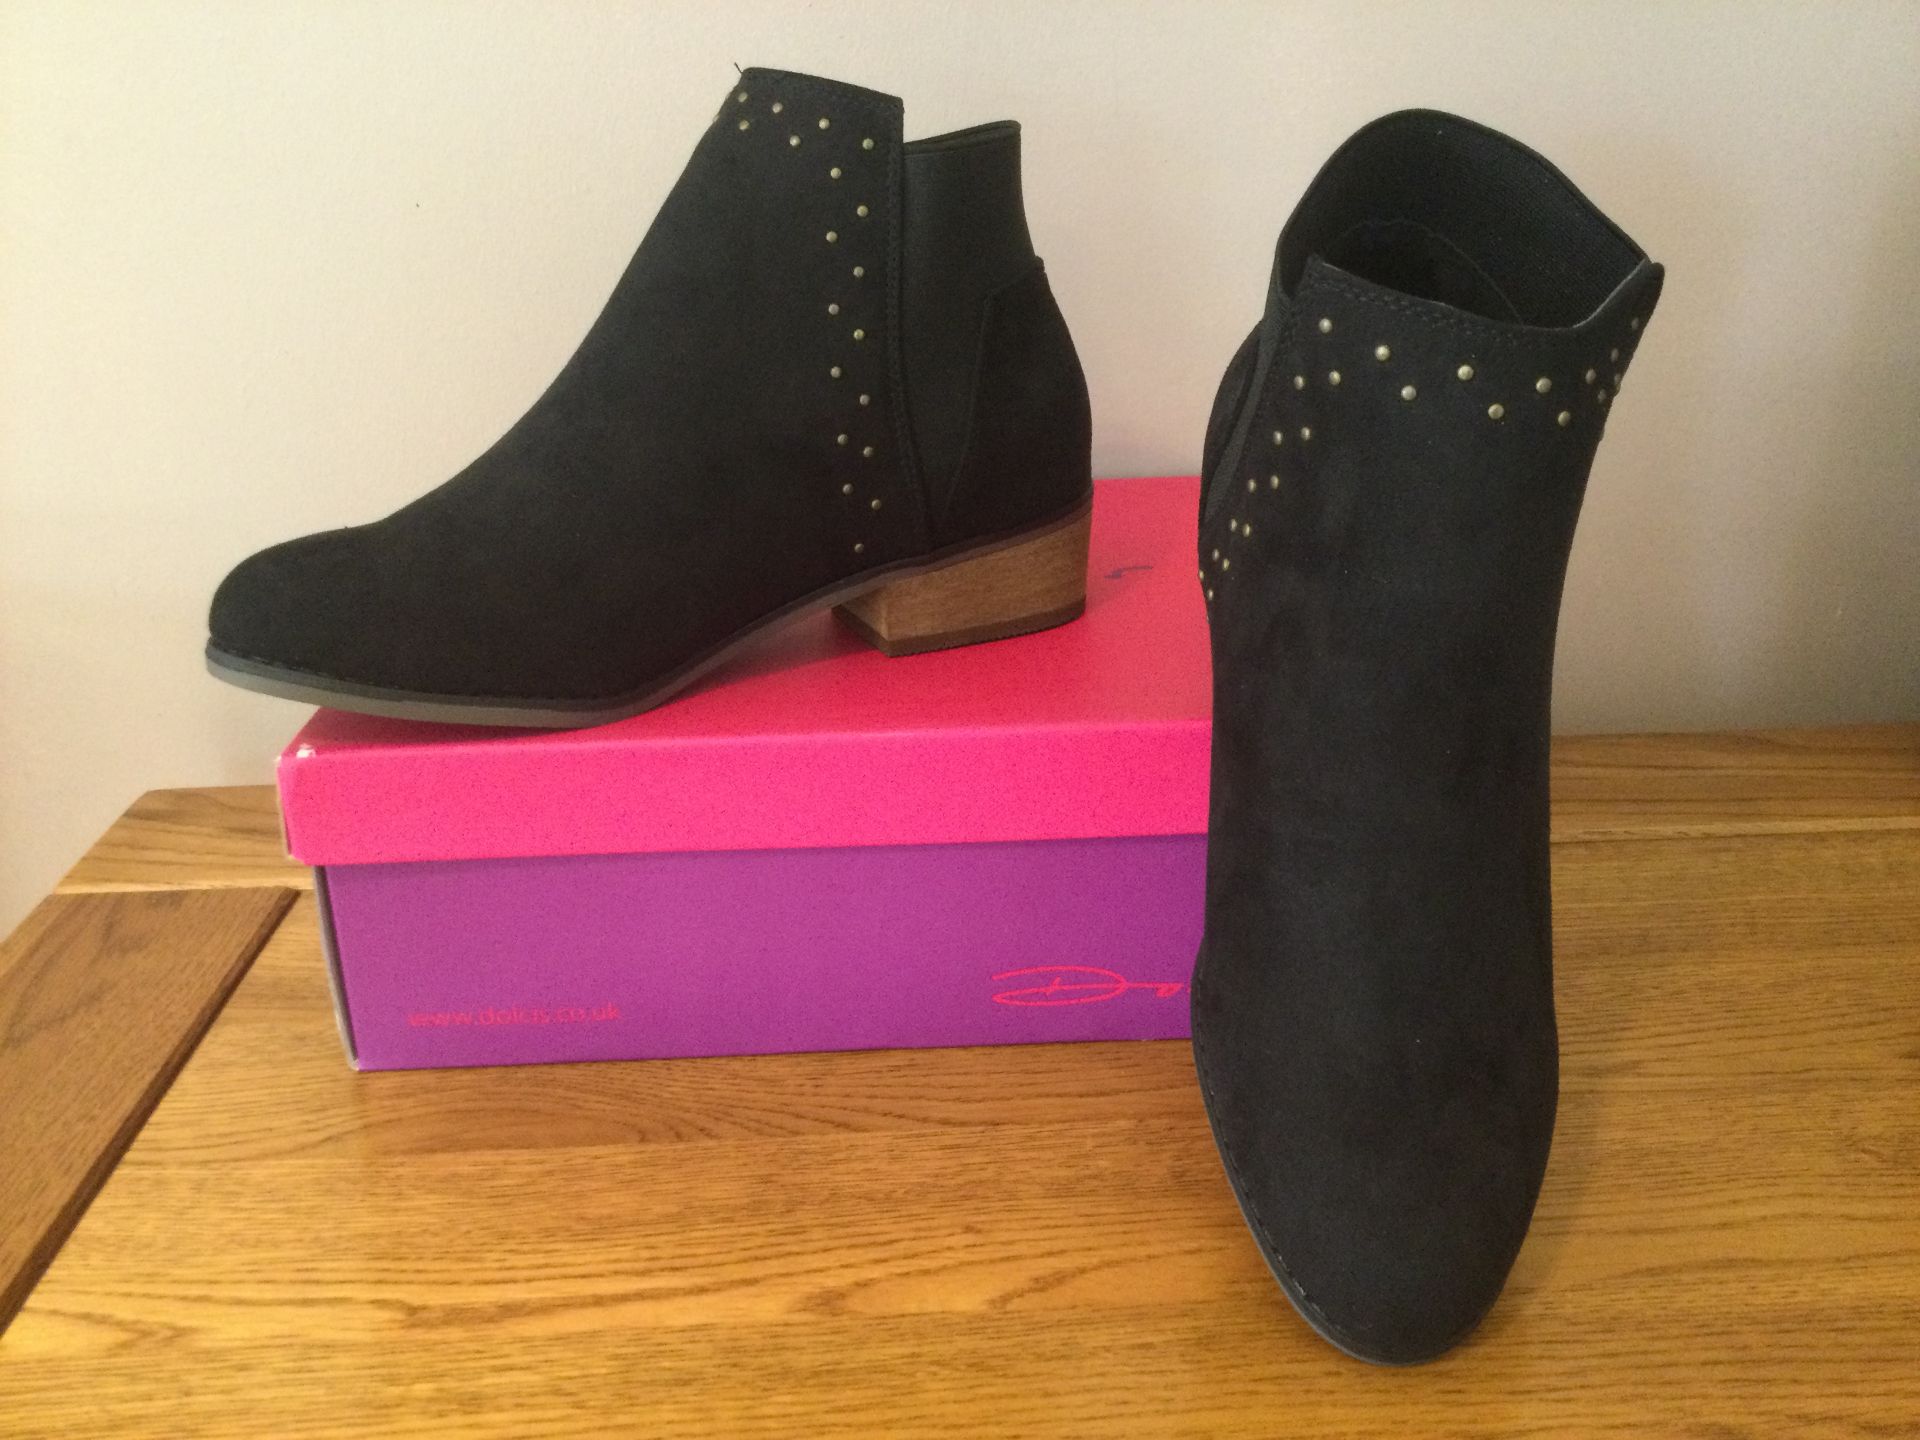 Dolcis “Wendy” Ankle Boots, Size 4, Black - New RRP £45.00 - Image 6 of 6